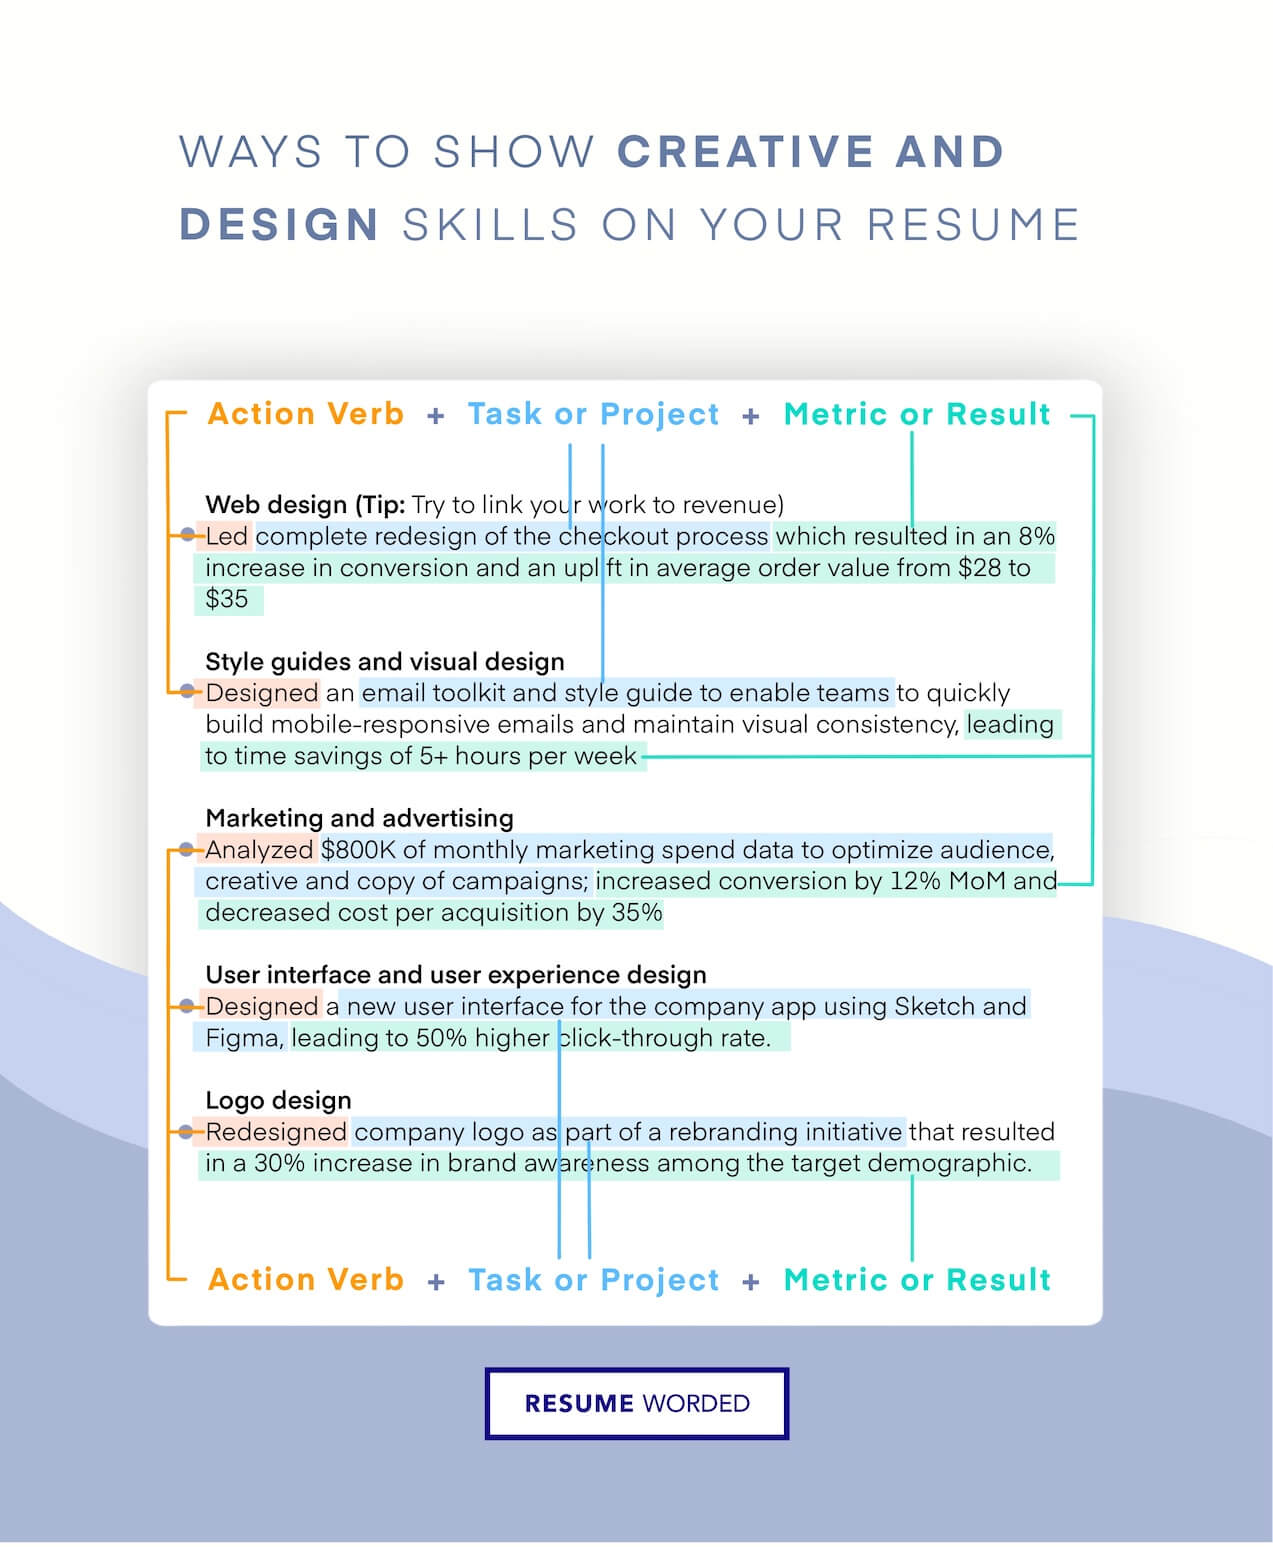 Showcase your design expertise on your resume - Mechanical Engineer Resume